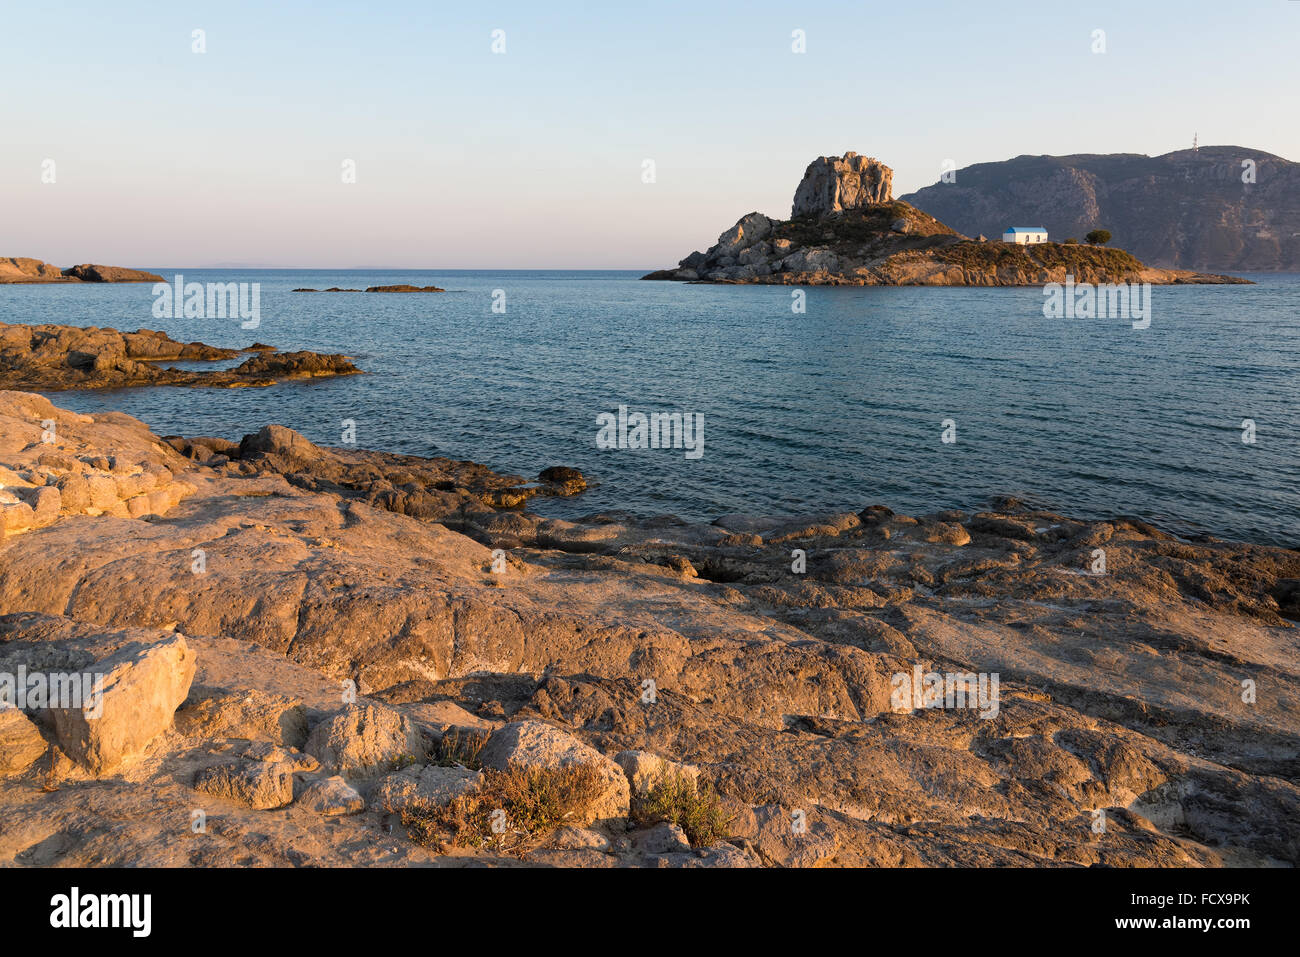 Landscape with rocky coastline and islet at sunset in Kos island, Greece Stock Photo